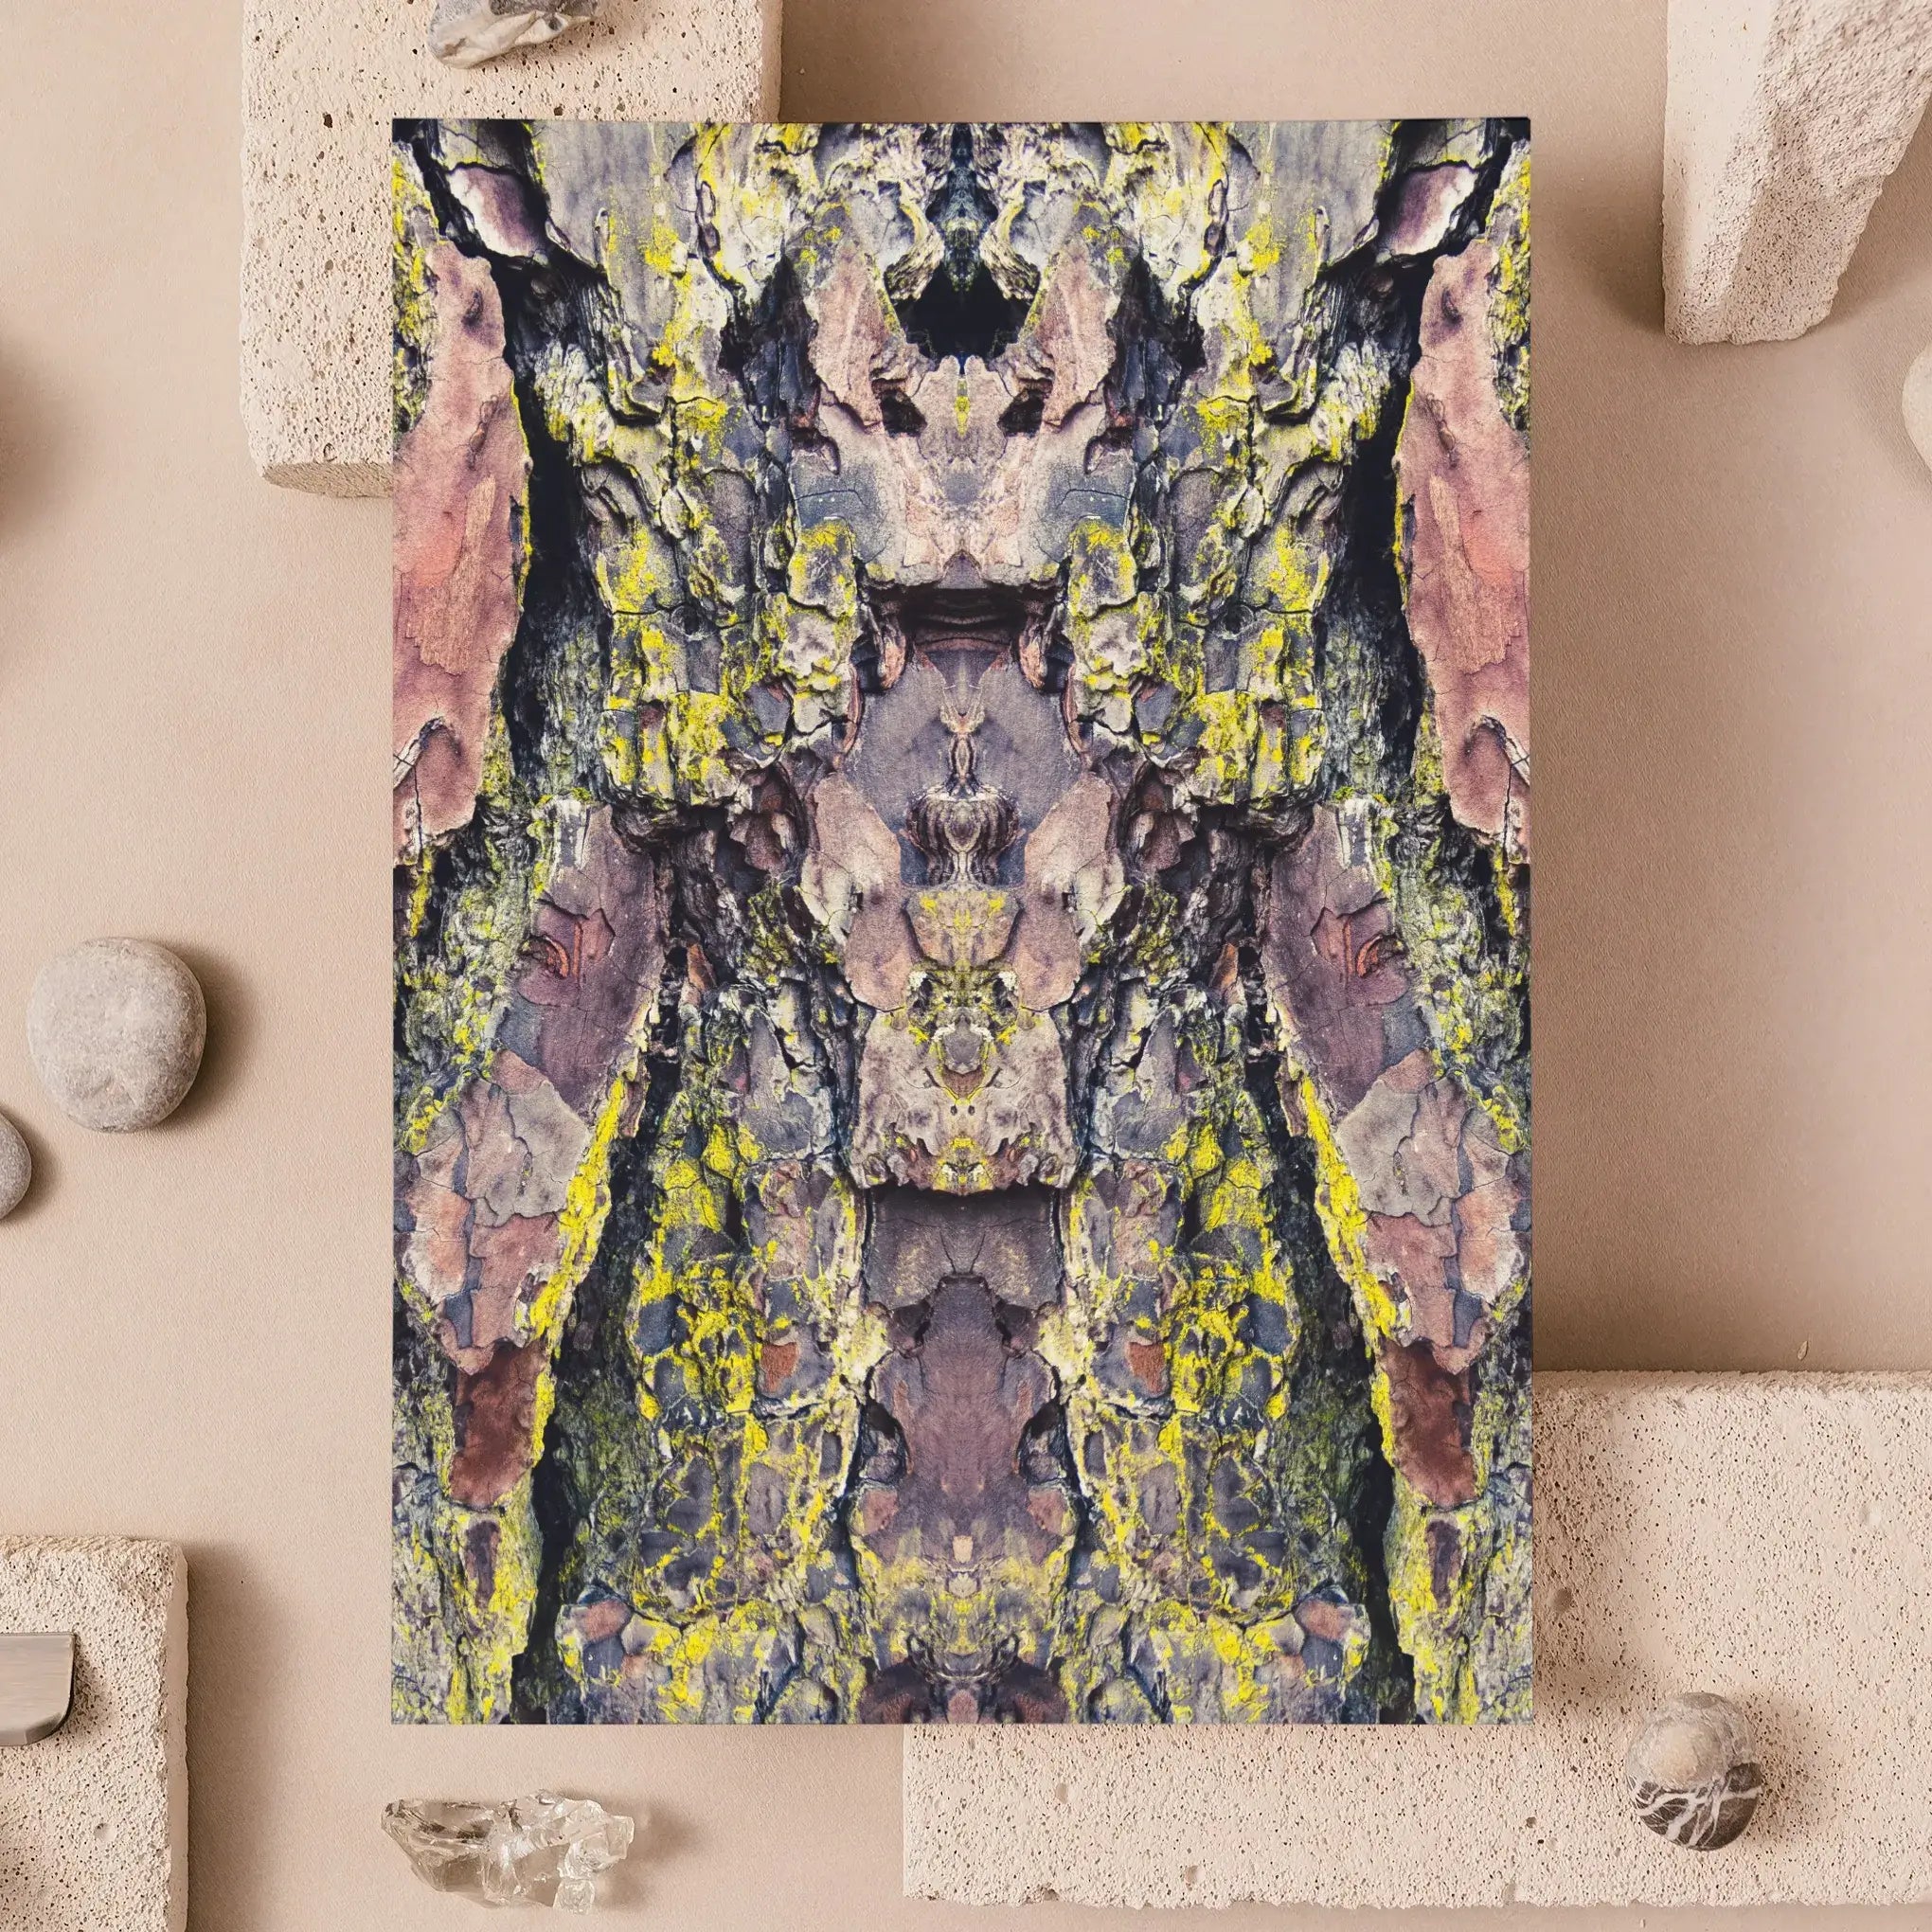 Barking Mad Too - Trippy Tree Trunk Art Greeting Card - Greeting & Note Cards - Aesthetic Art